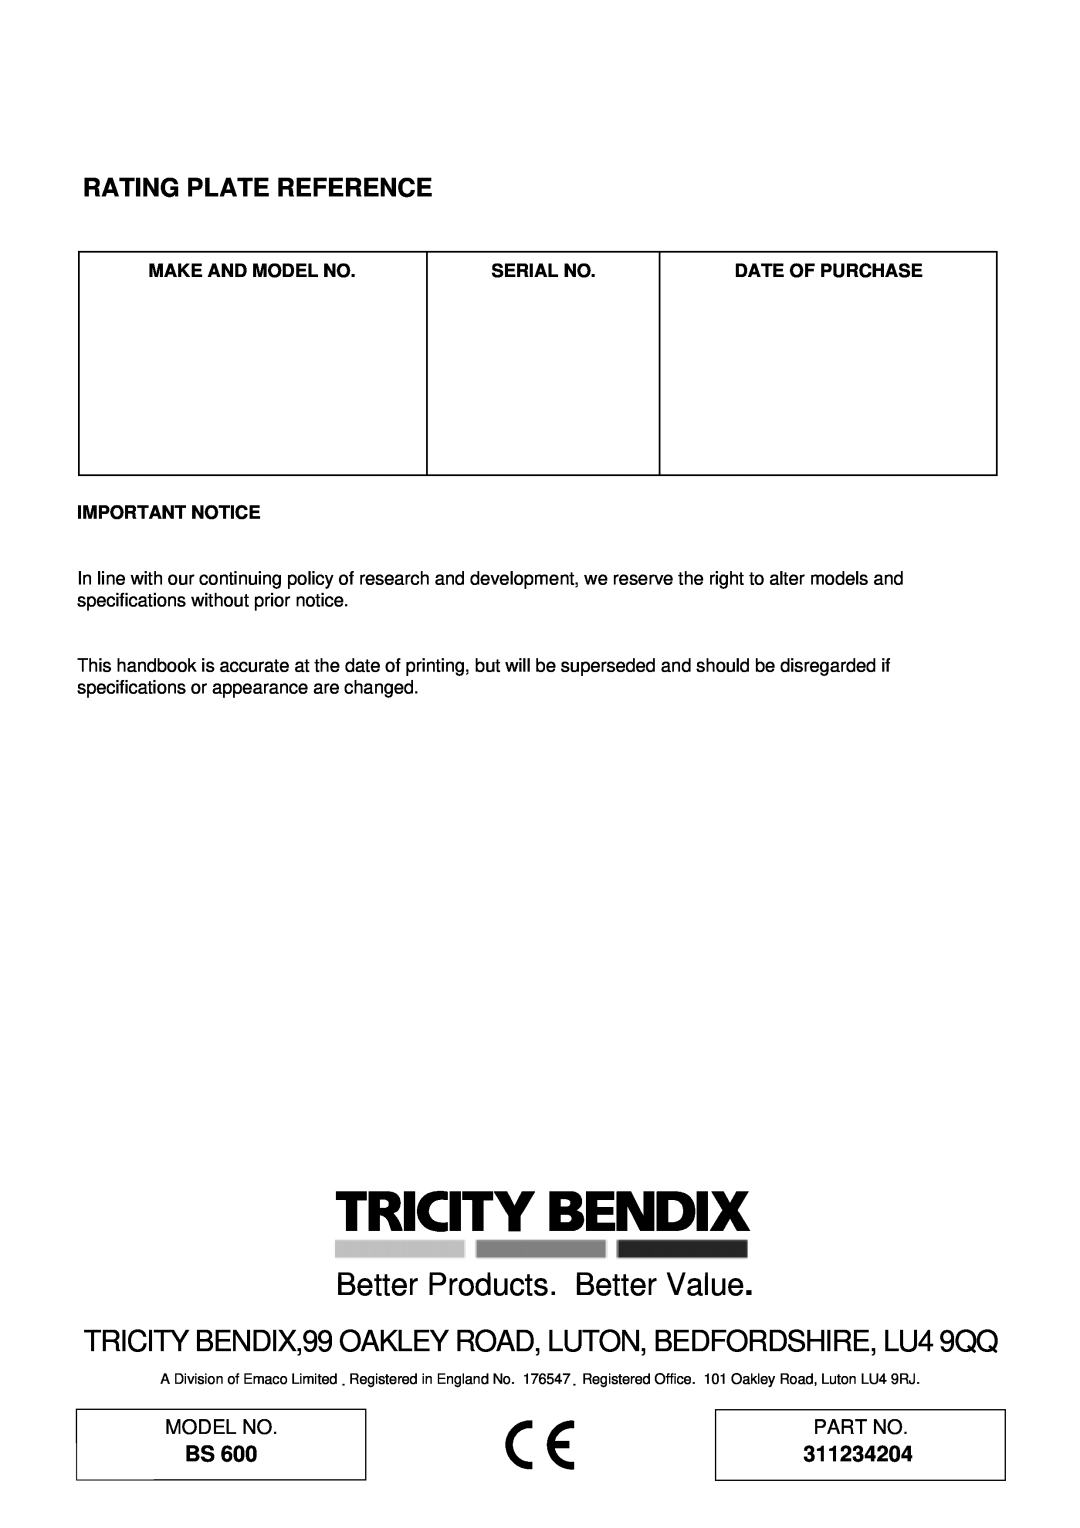 Tricity Bendix BS 600 Rating Plate Reference, 311234204, Better Products. Better Value, Model No, Part No, Serial No 